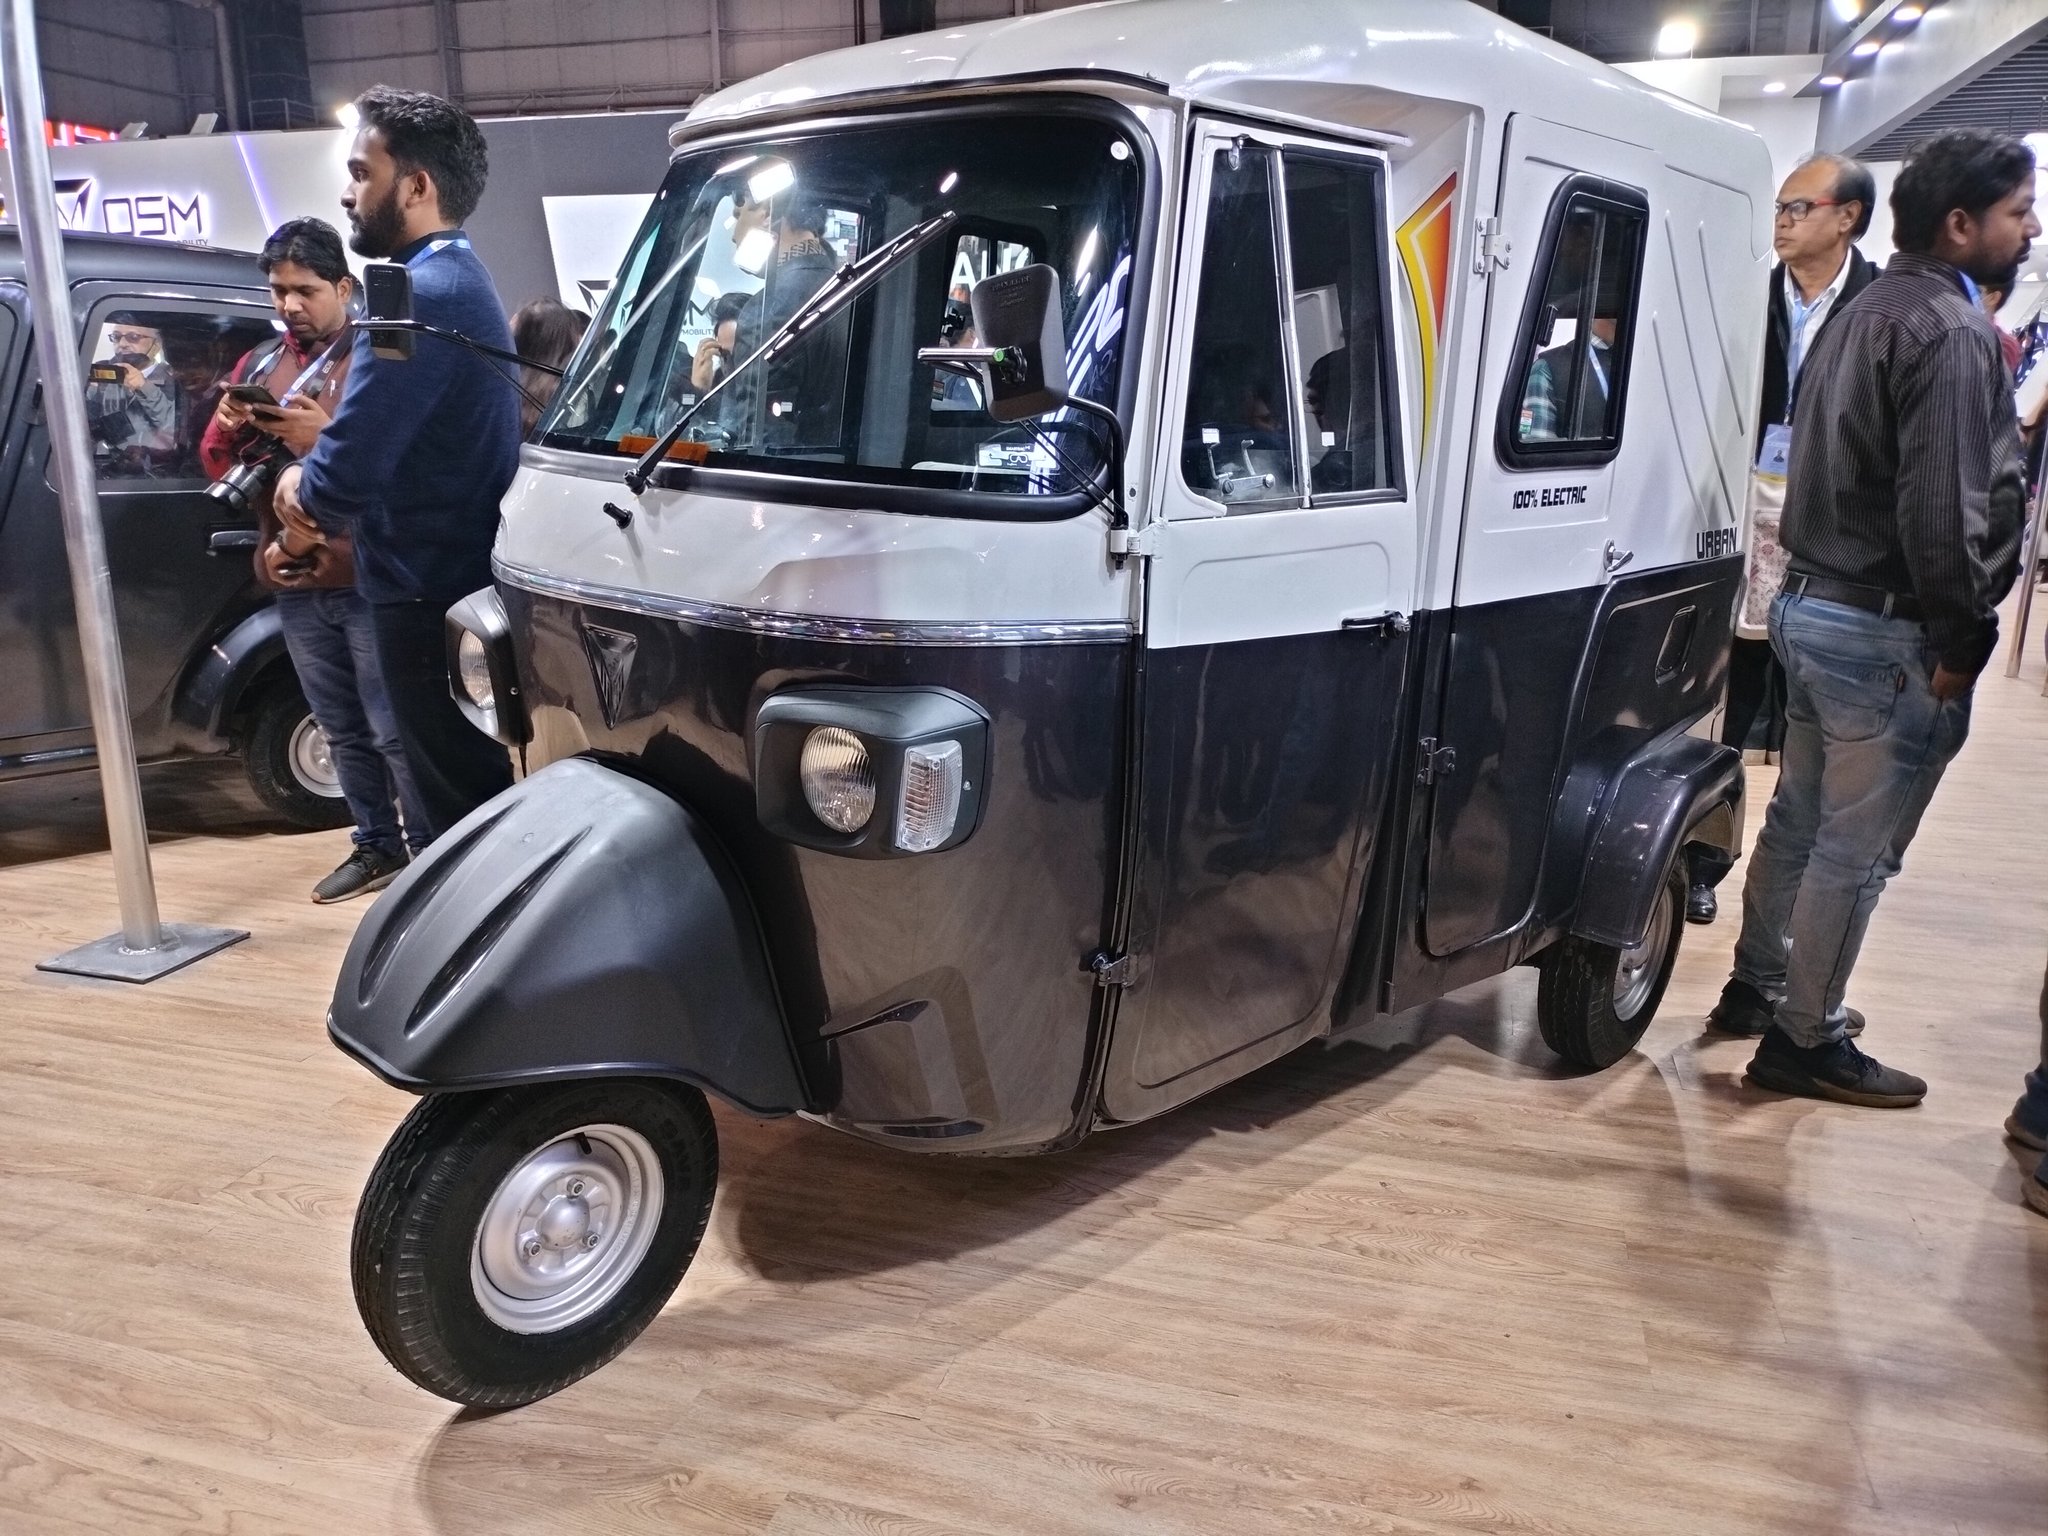 https://e-vehicleinfo.com/osm-mobility-launches-two-electric-3-wheeler-for-passenger-mobility-muse-and-kraze/